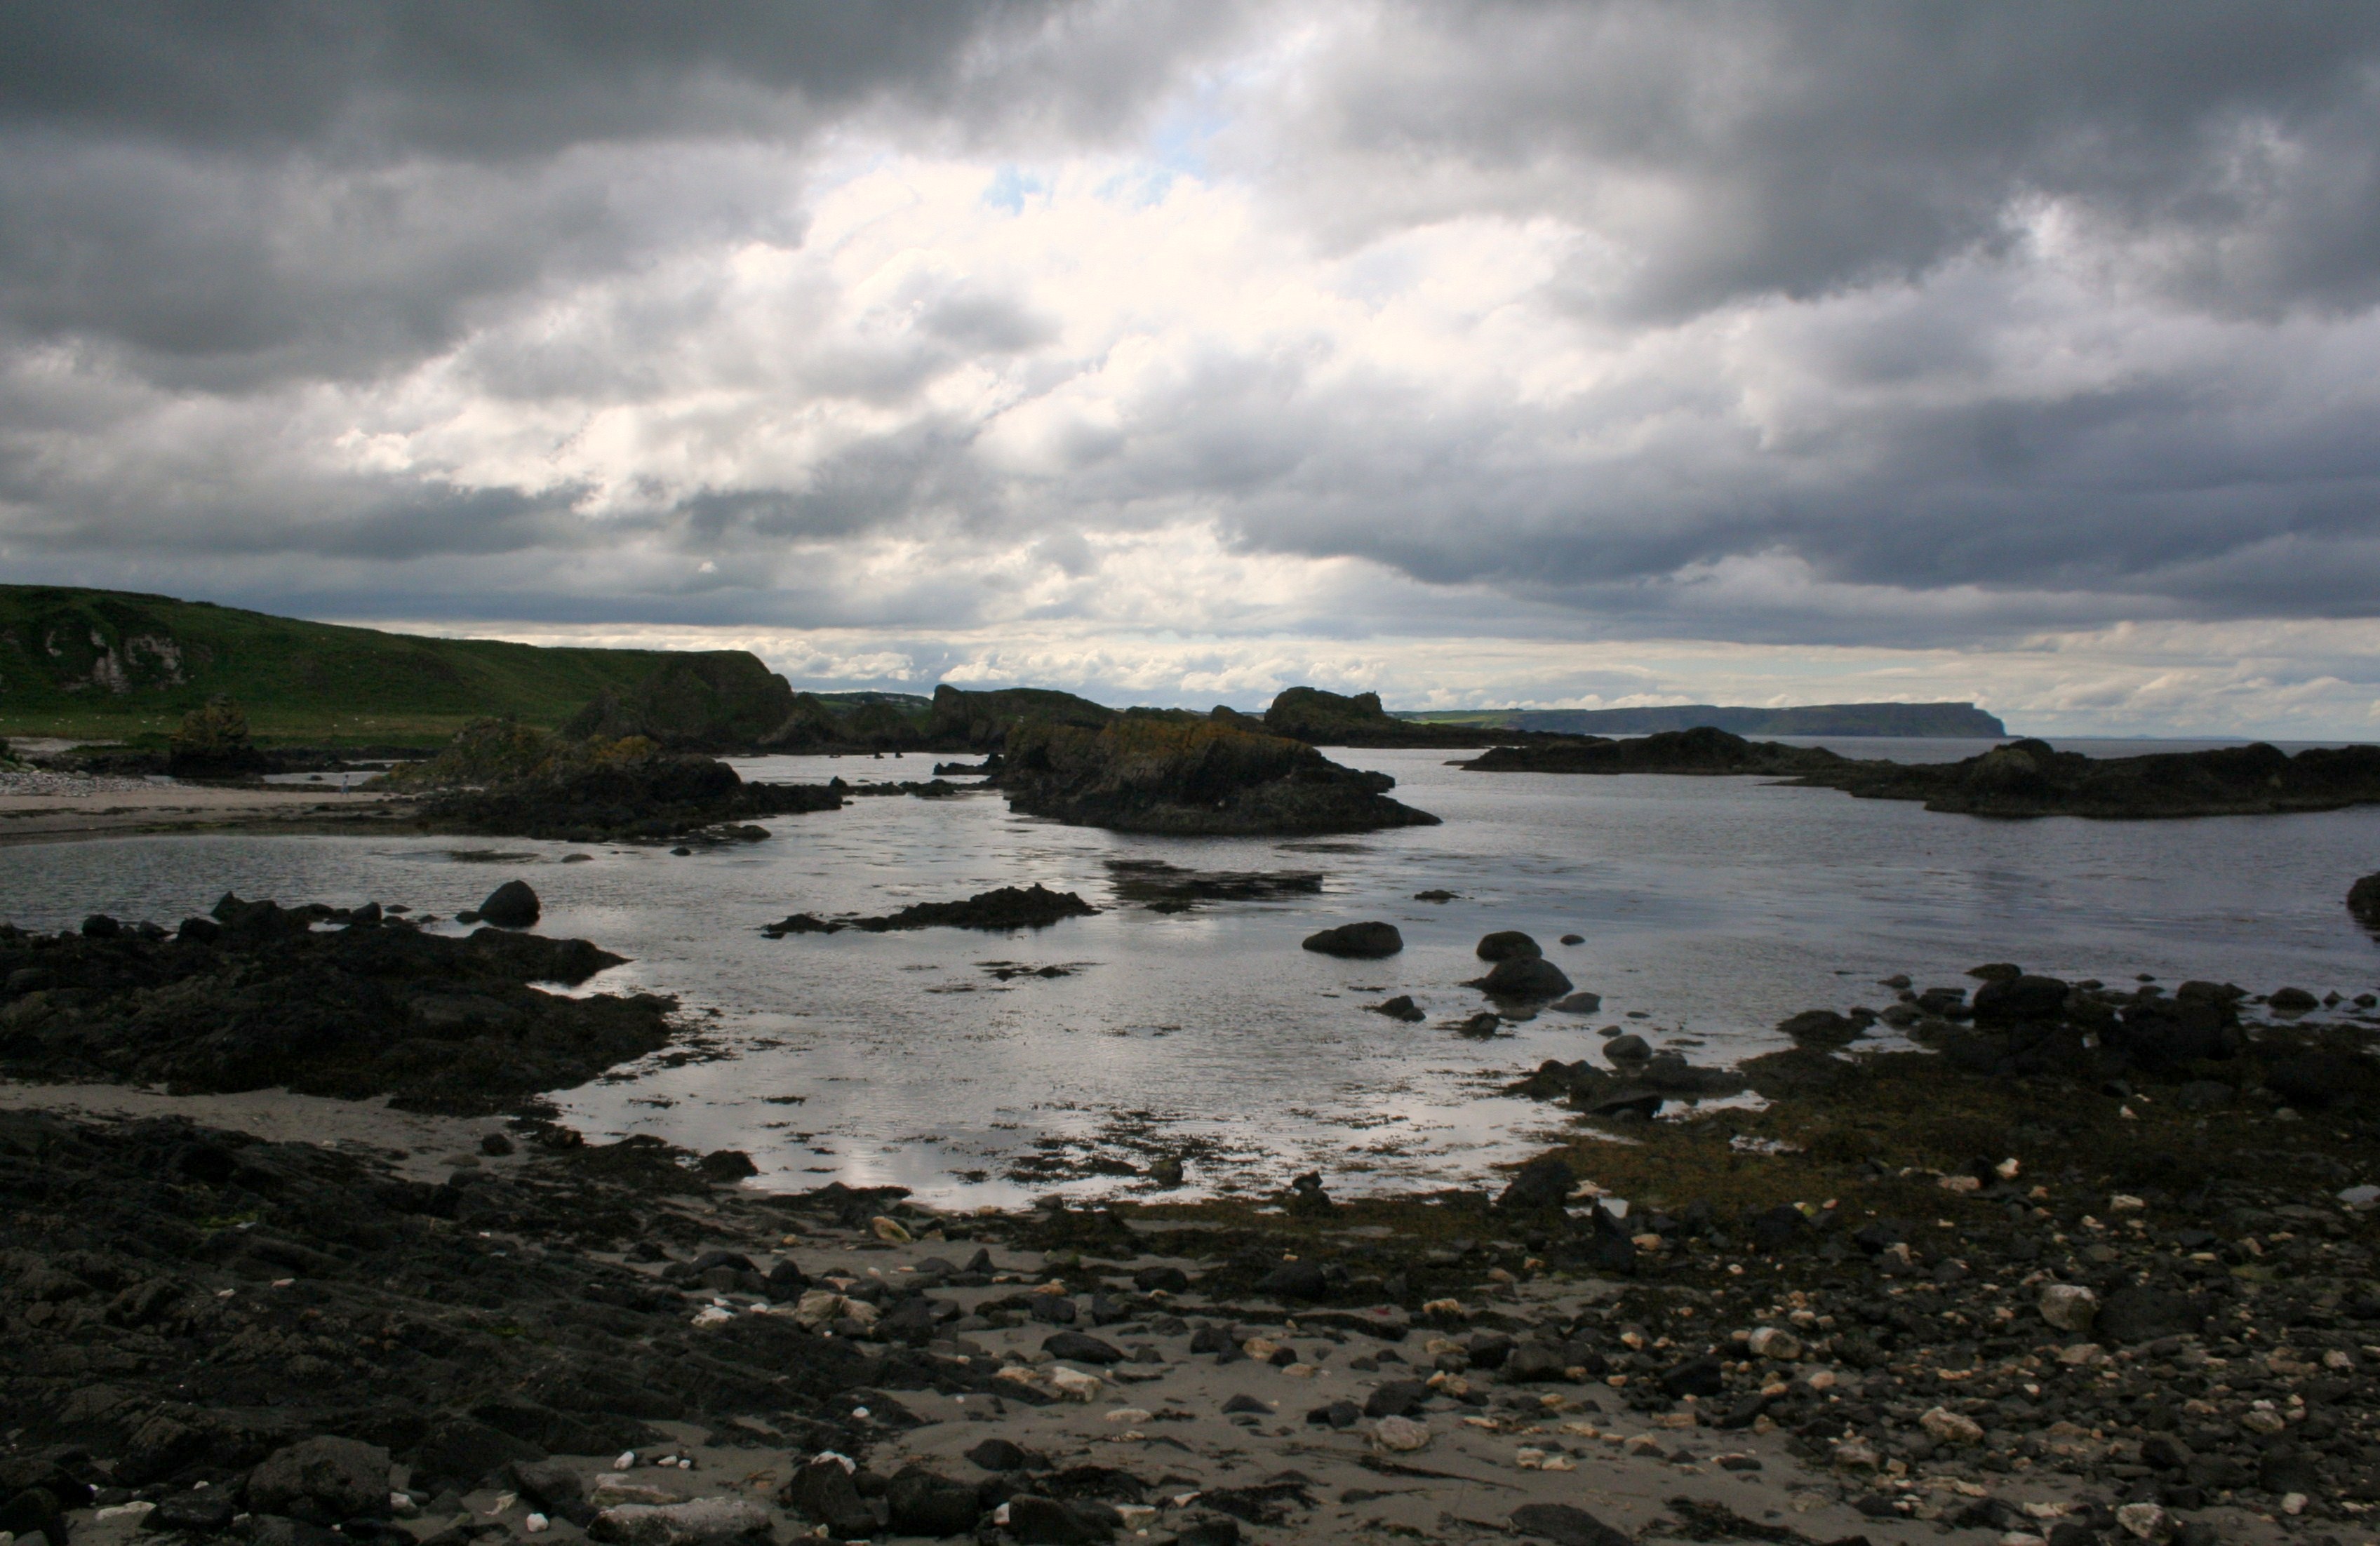 File:Rocky Shore at Ballintoy - geograph.org.uk - 1755399.jpg ...